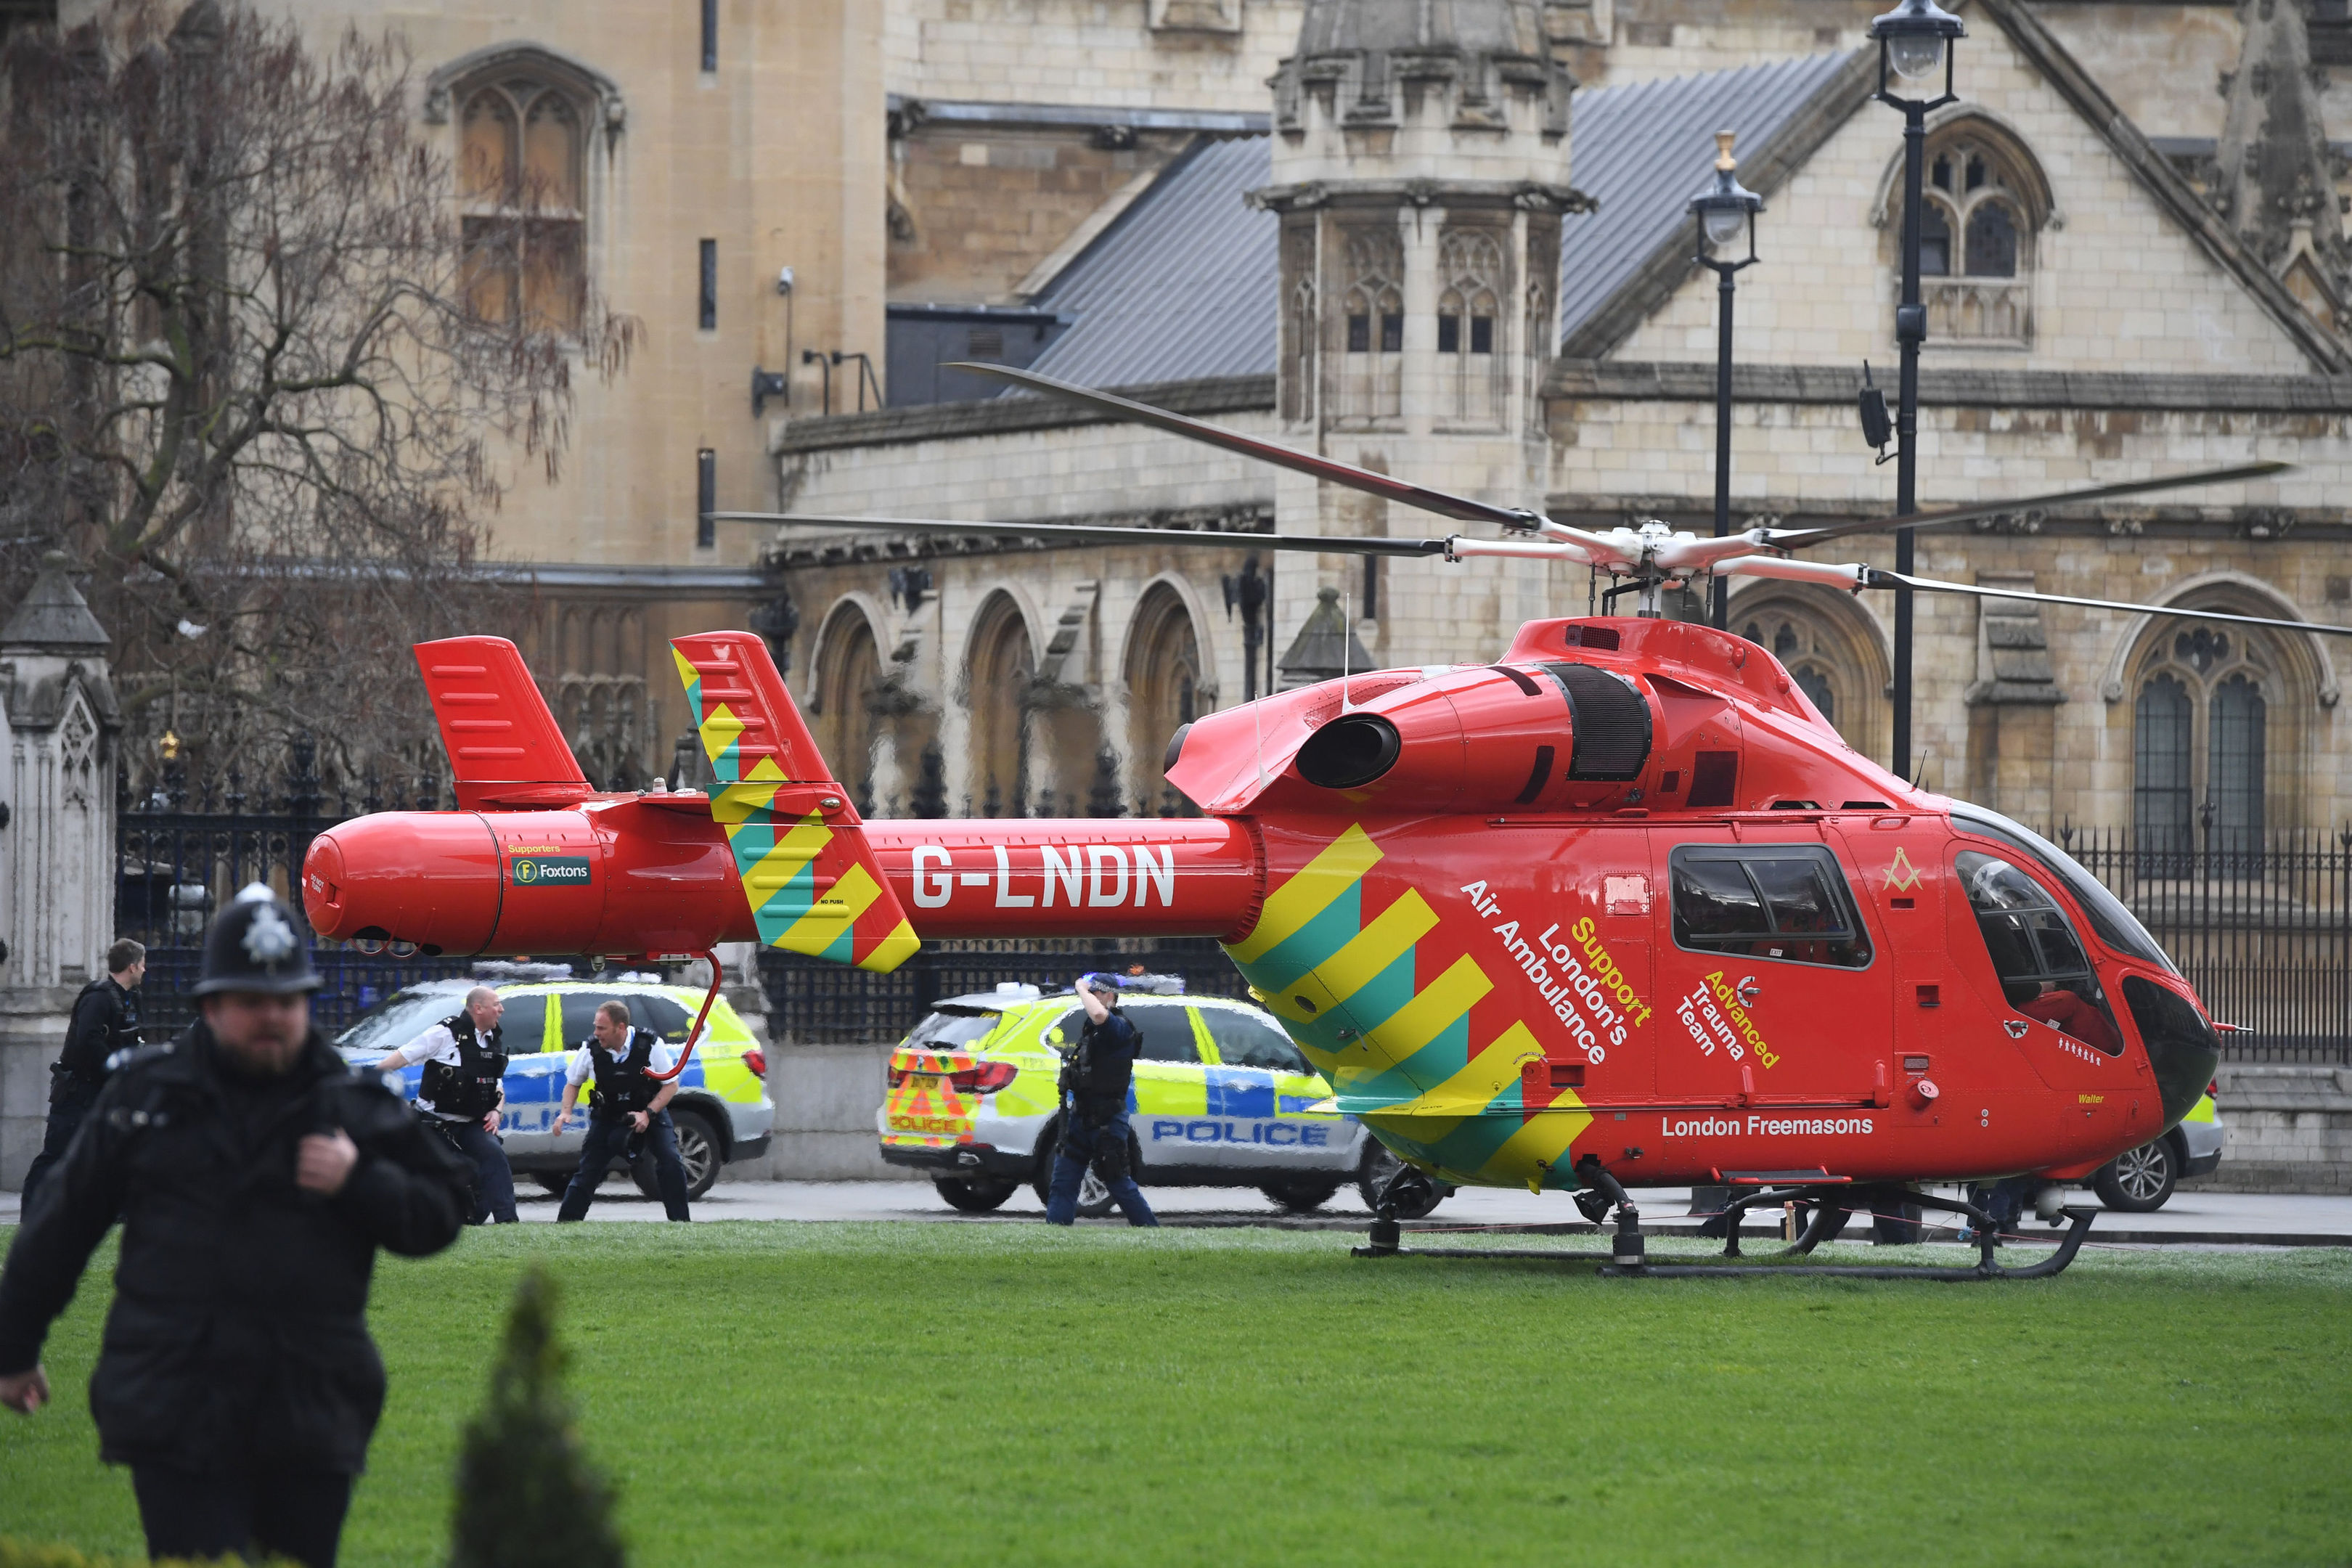 An Air Ambulance outside the Palace of Westminster.